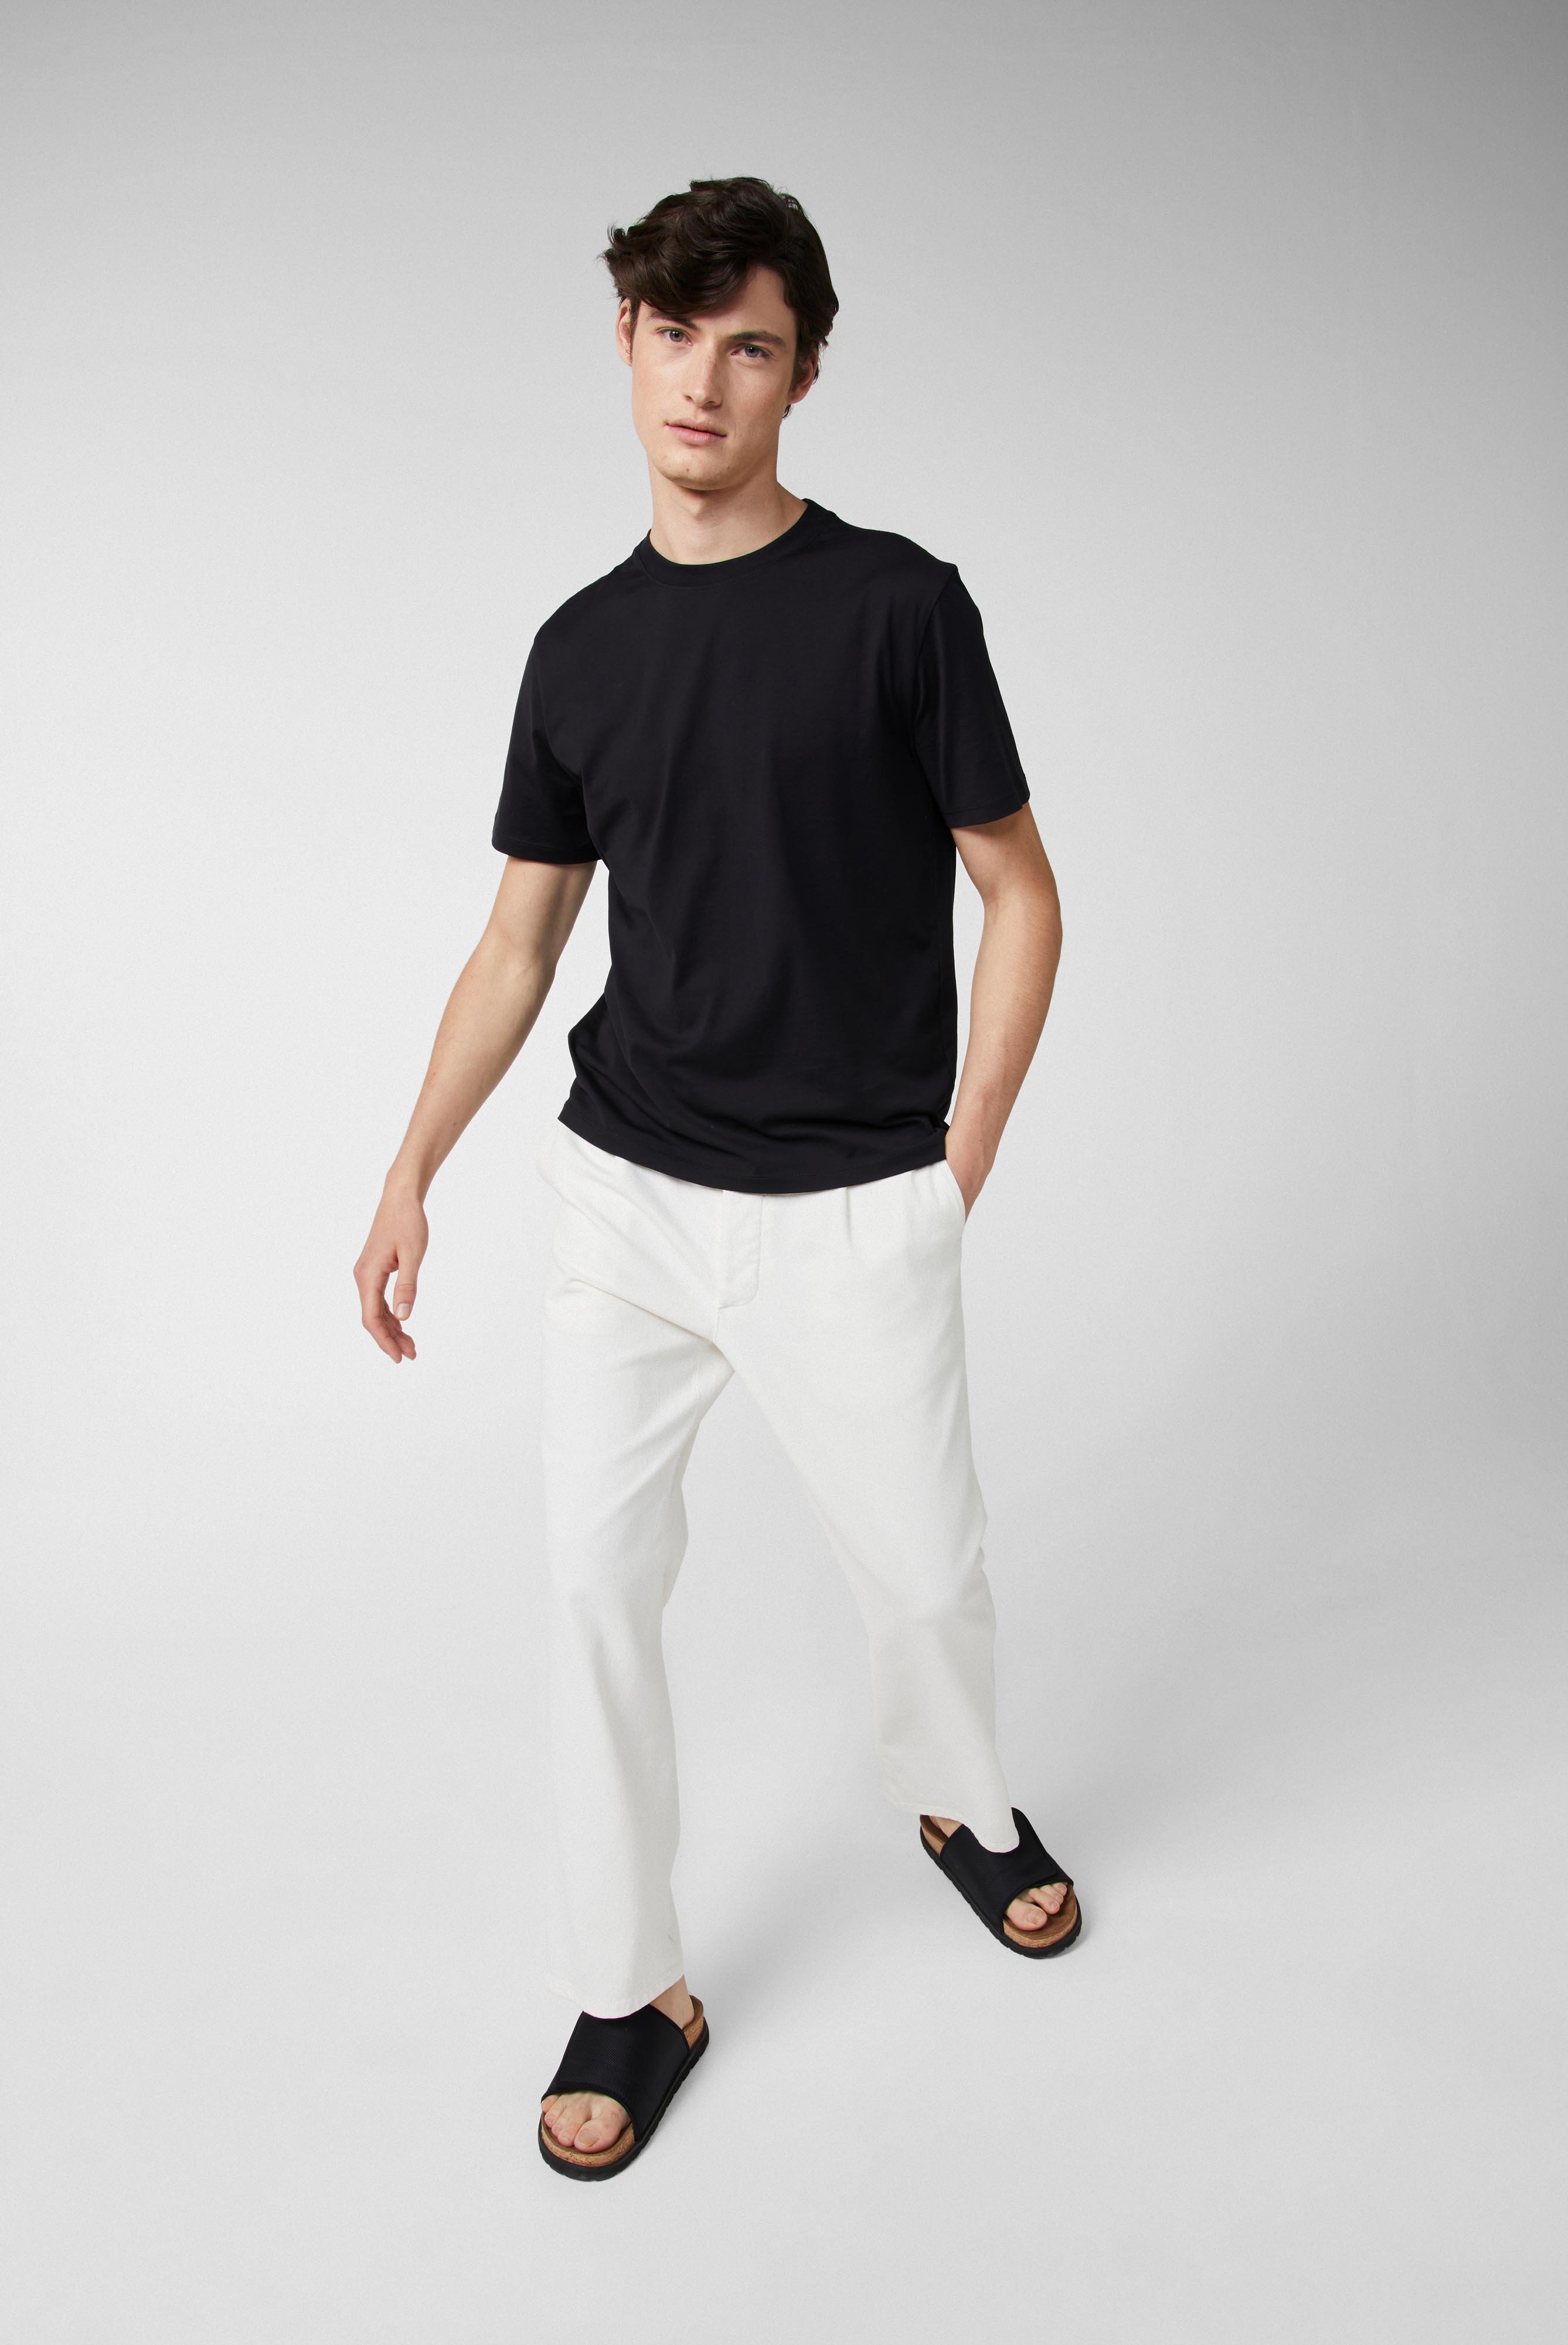 T-Shirts+Relaxed Fit Crew Neck Jersey T-Shirt+20.1660..Z20044.099.M